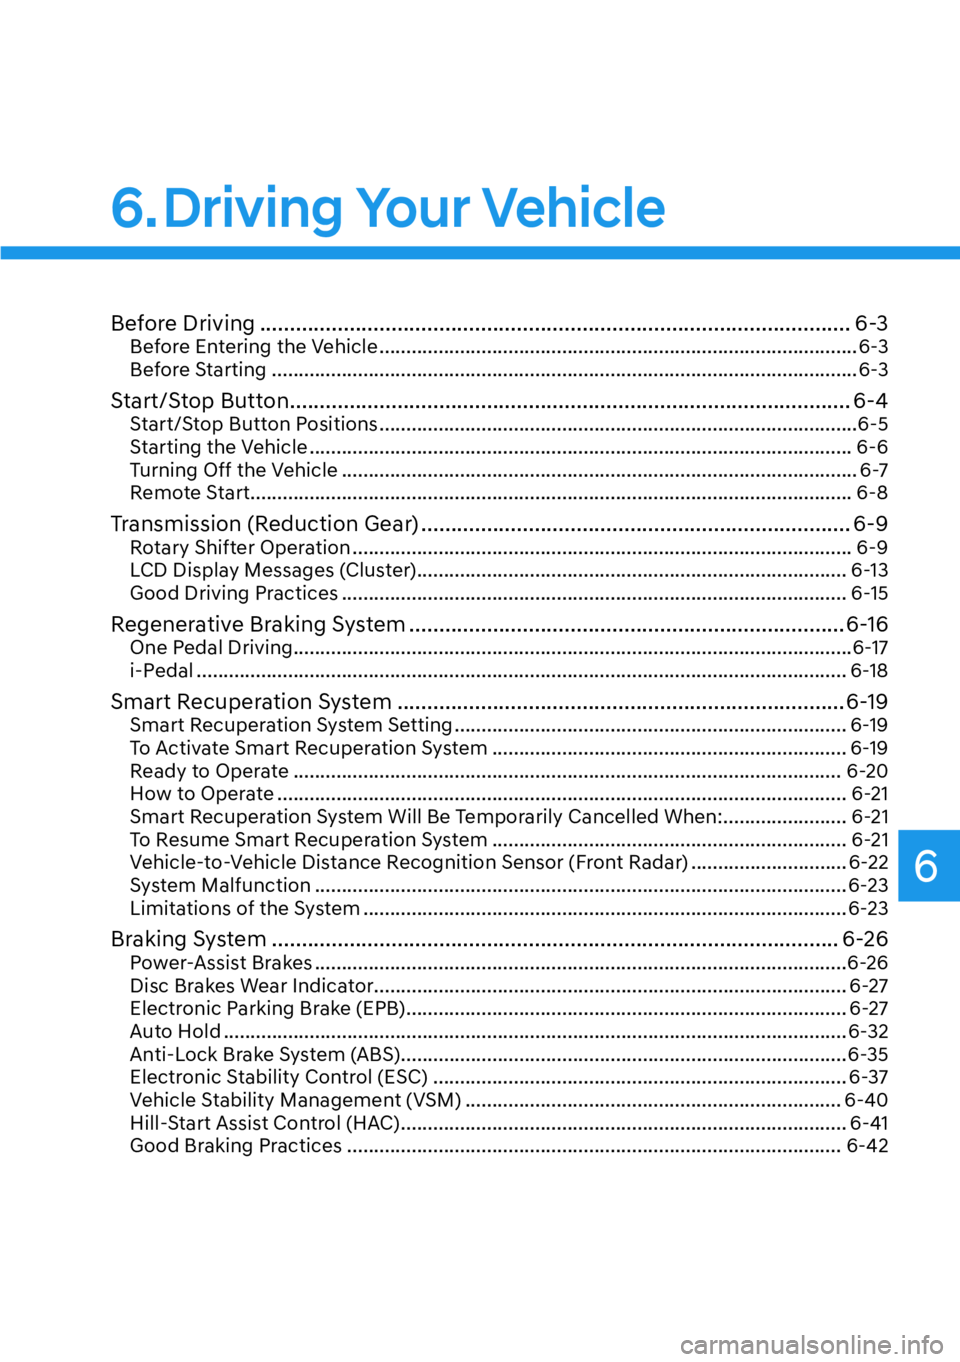 HYUNDAI IONIQ 5 2022  Owners Manual 6
6. Driving Your Vehicle
Before Driving ................................................................................................... 6-3Before Entering the Vehicle ............................